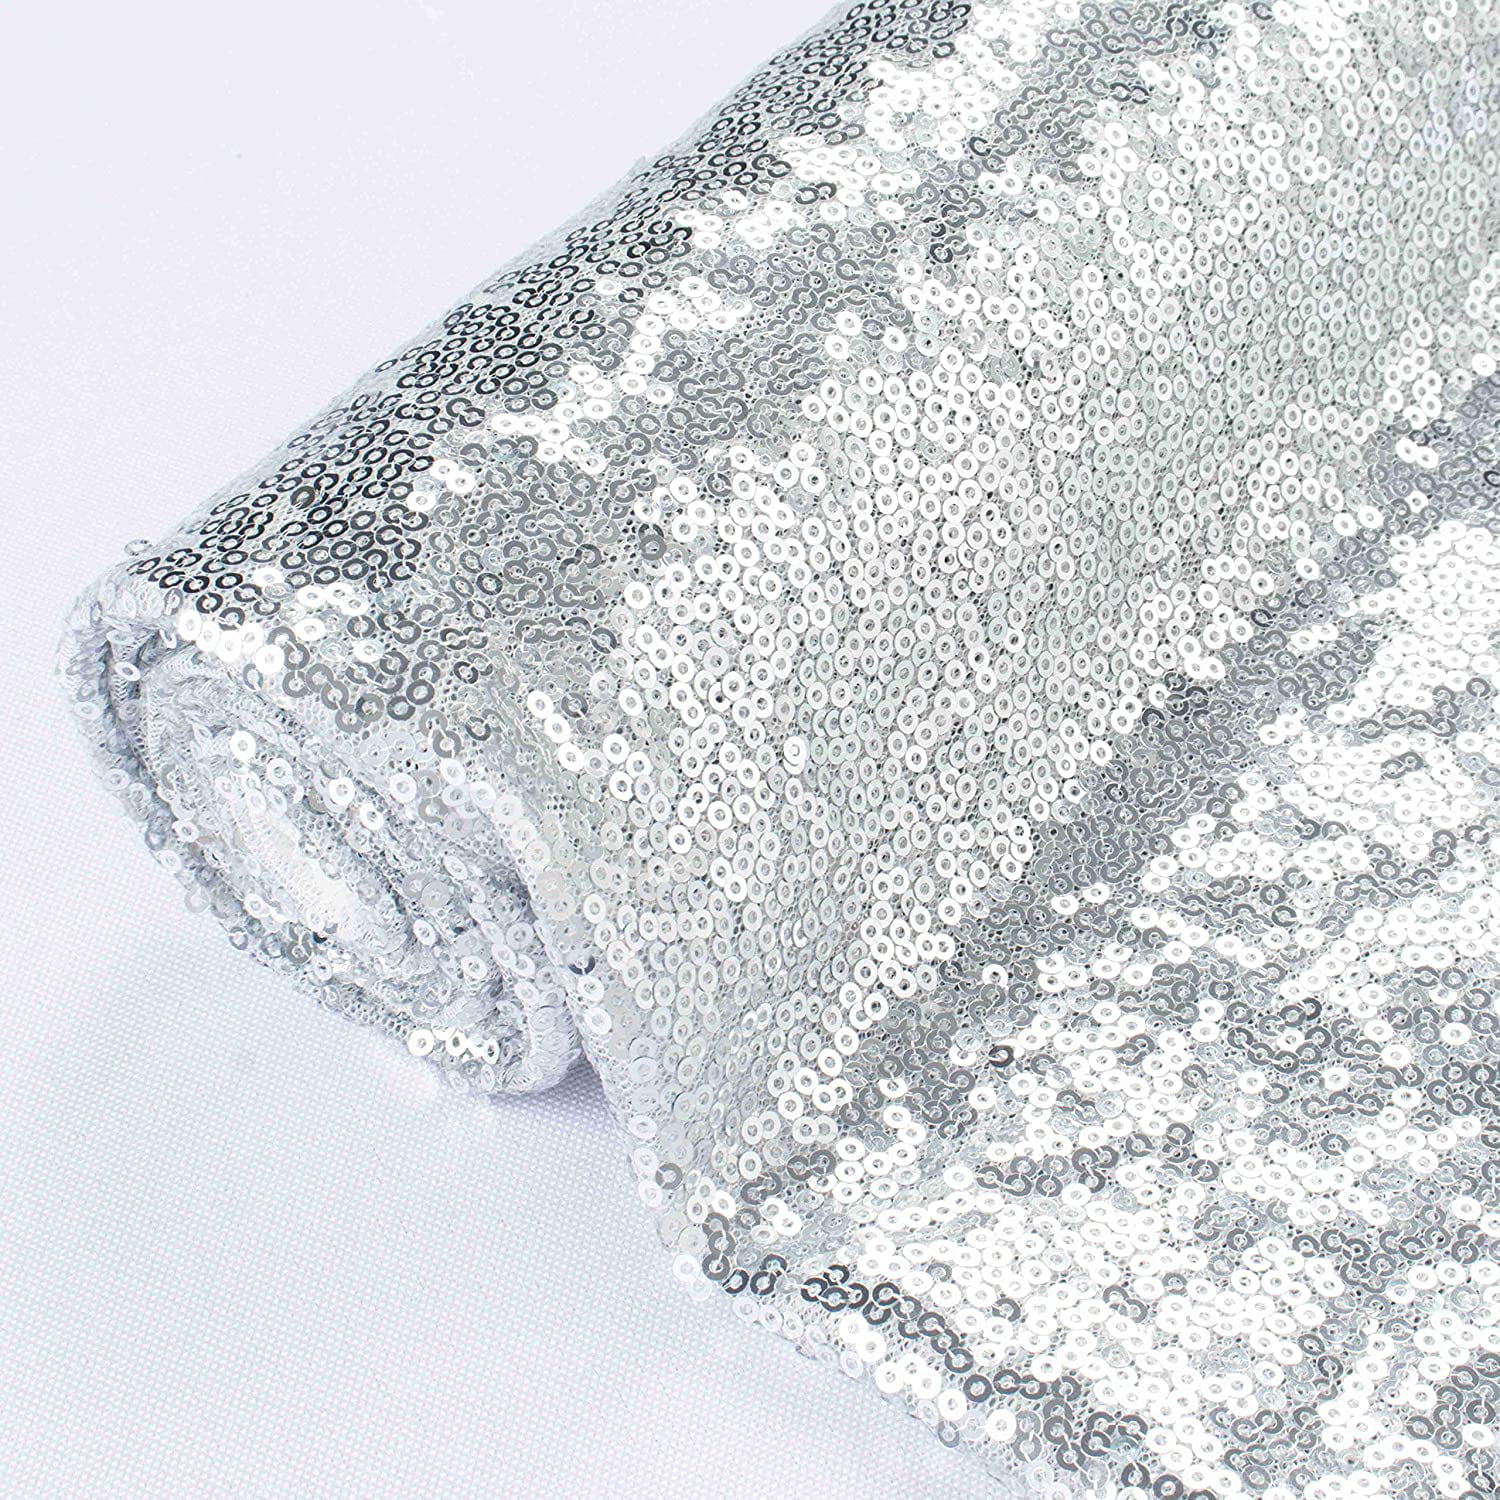 SoarDream Sequin Fabric by The Yard Gold 4 Yard Shimmer Fabric